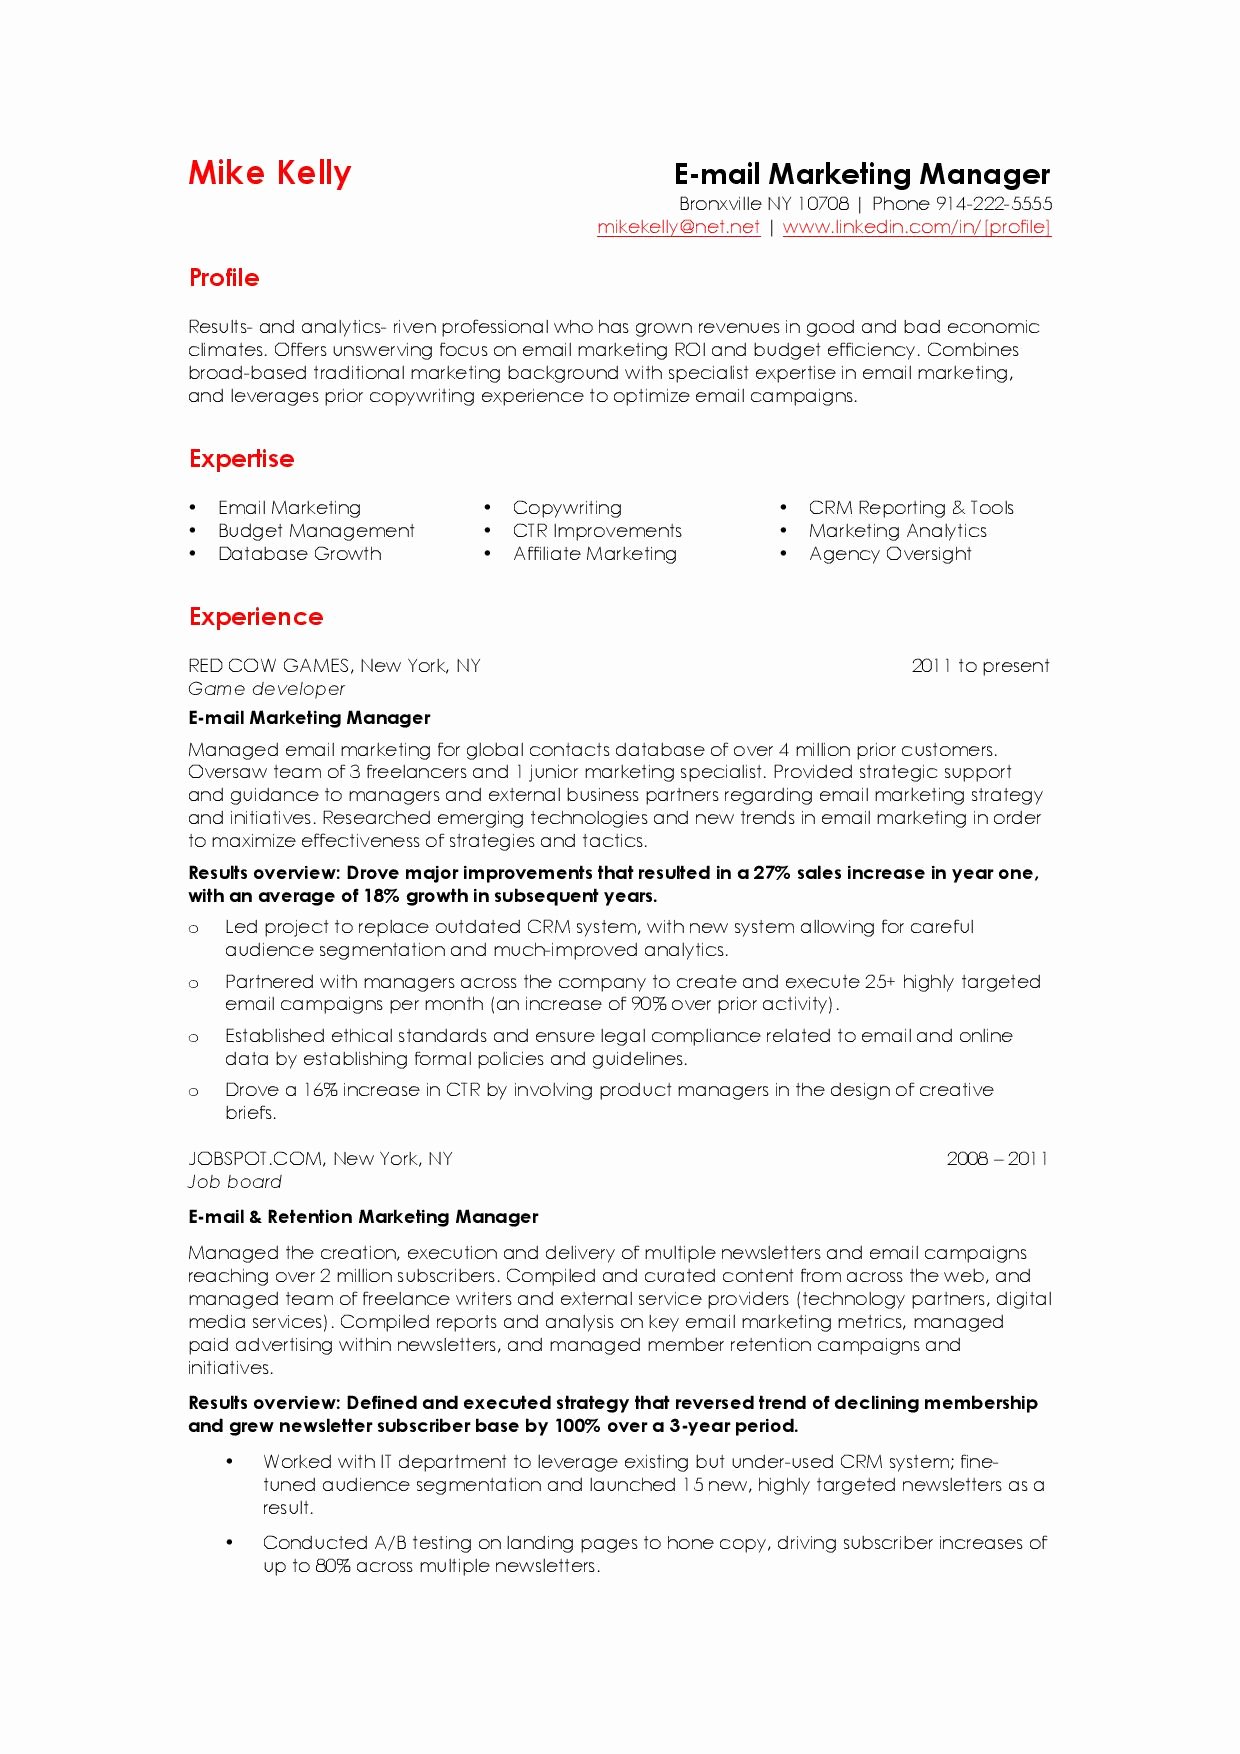 Free Marketing Resume Template Awesome How to Write An Email Marketing Resume Sample that Hrs Choose